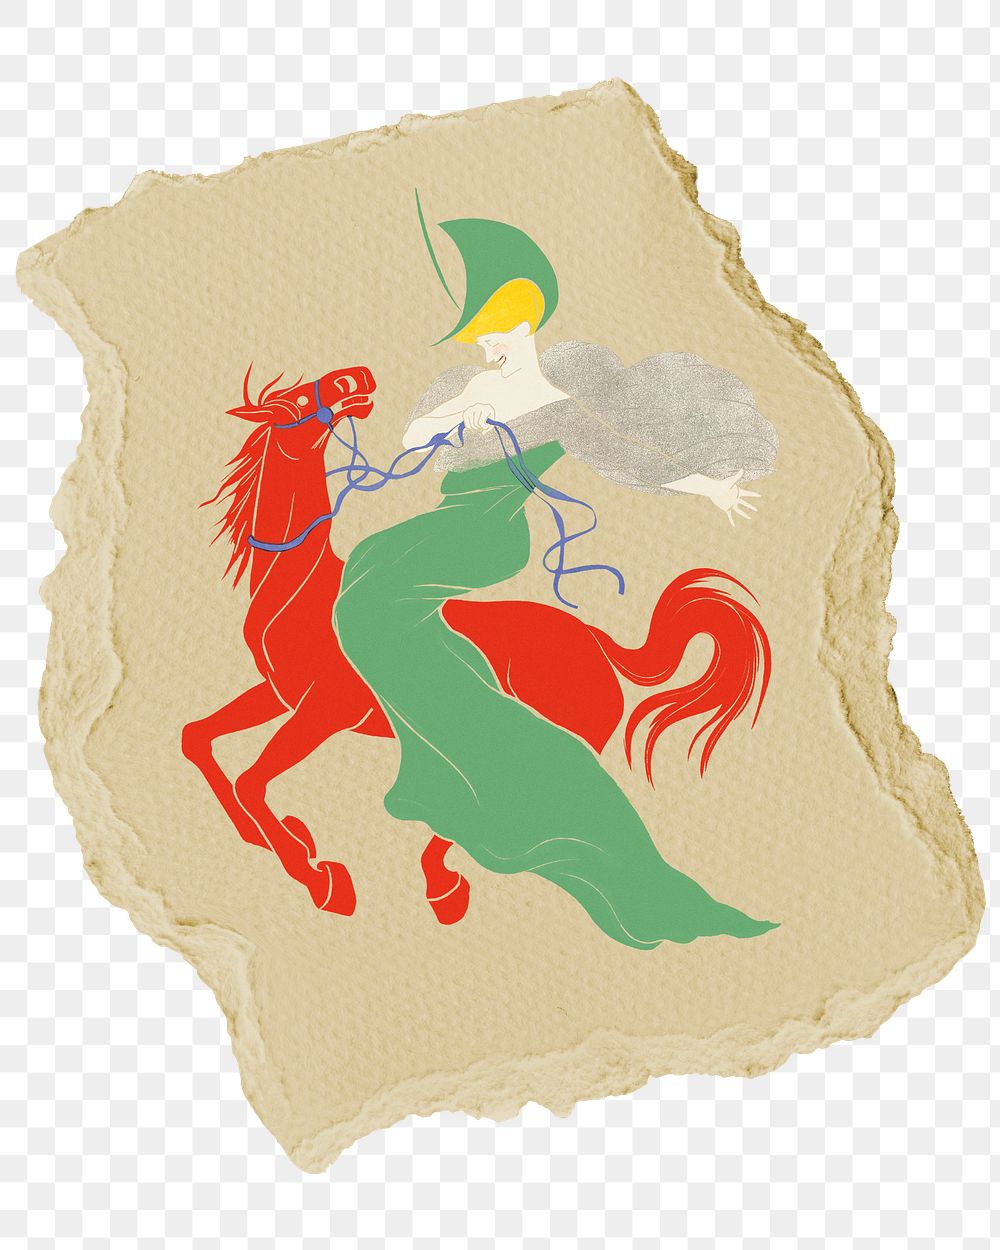 Png horse and woman sticker, vintage illustration on ripped paper, transparent background